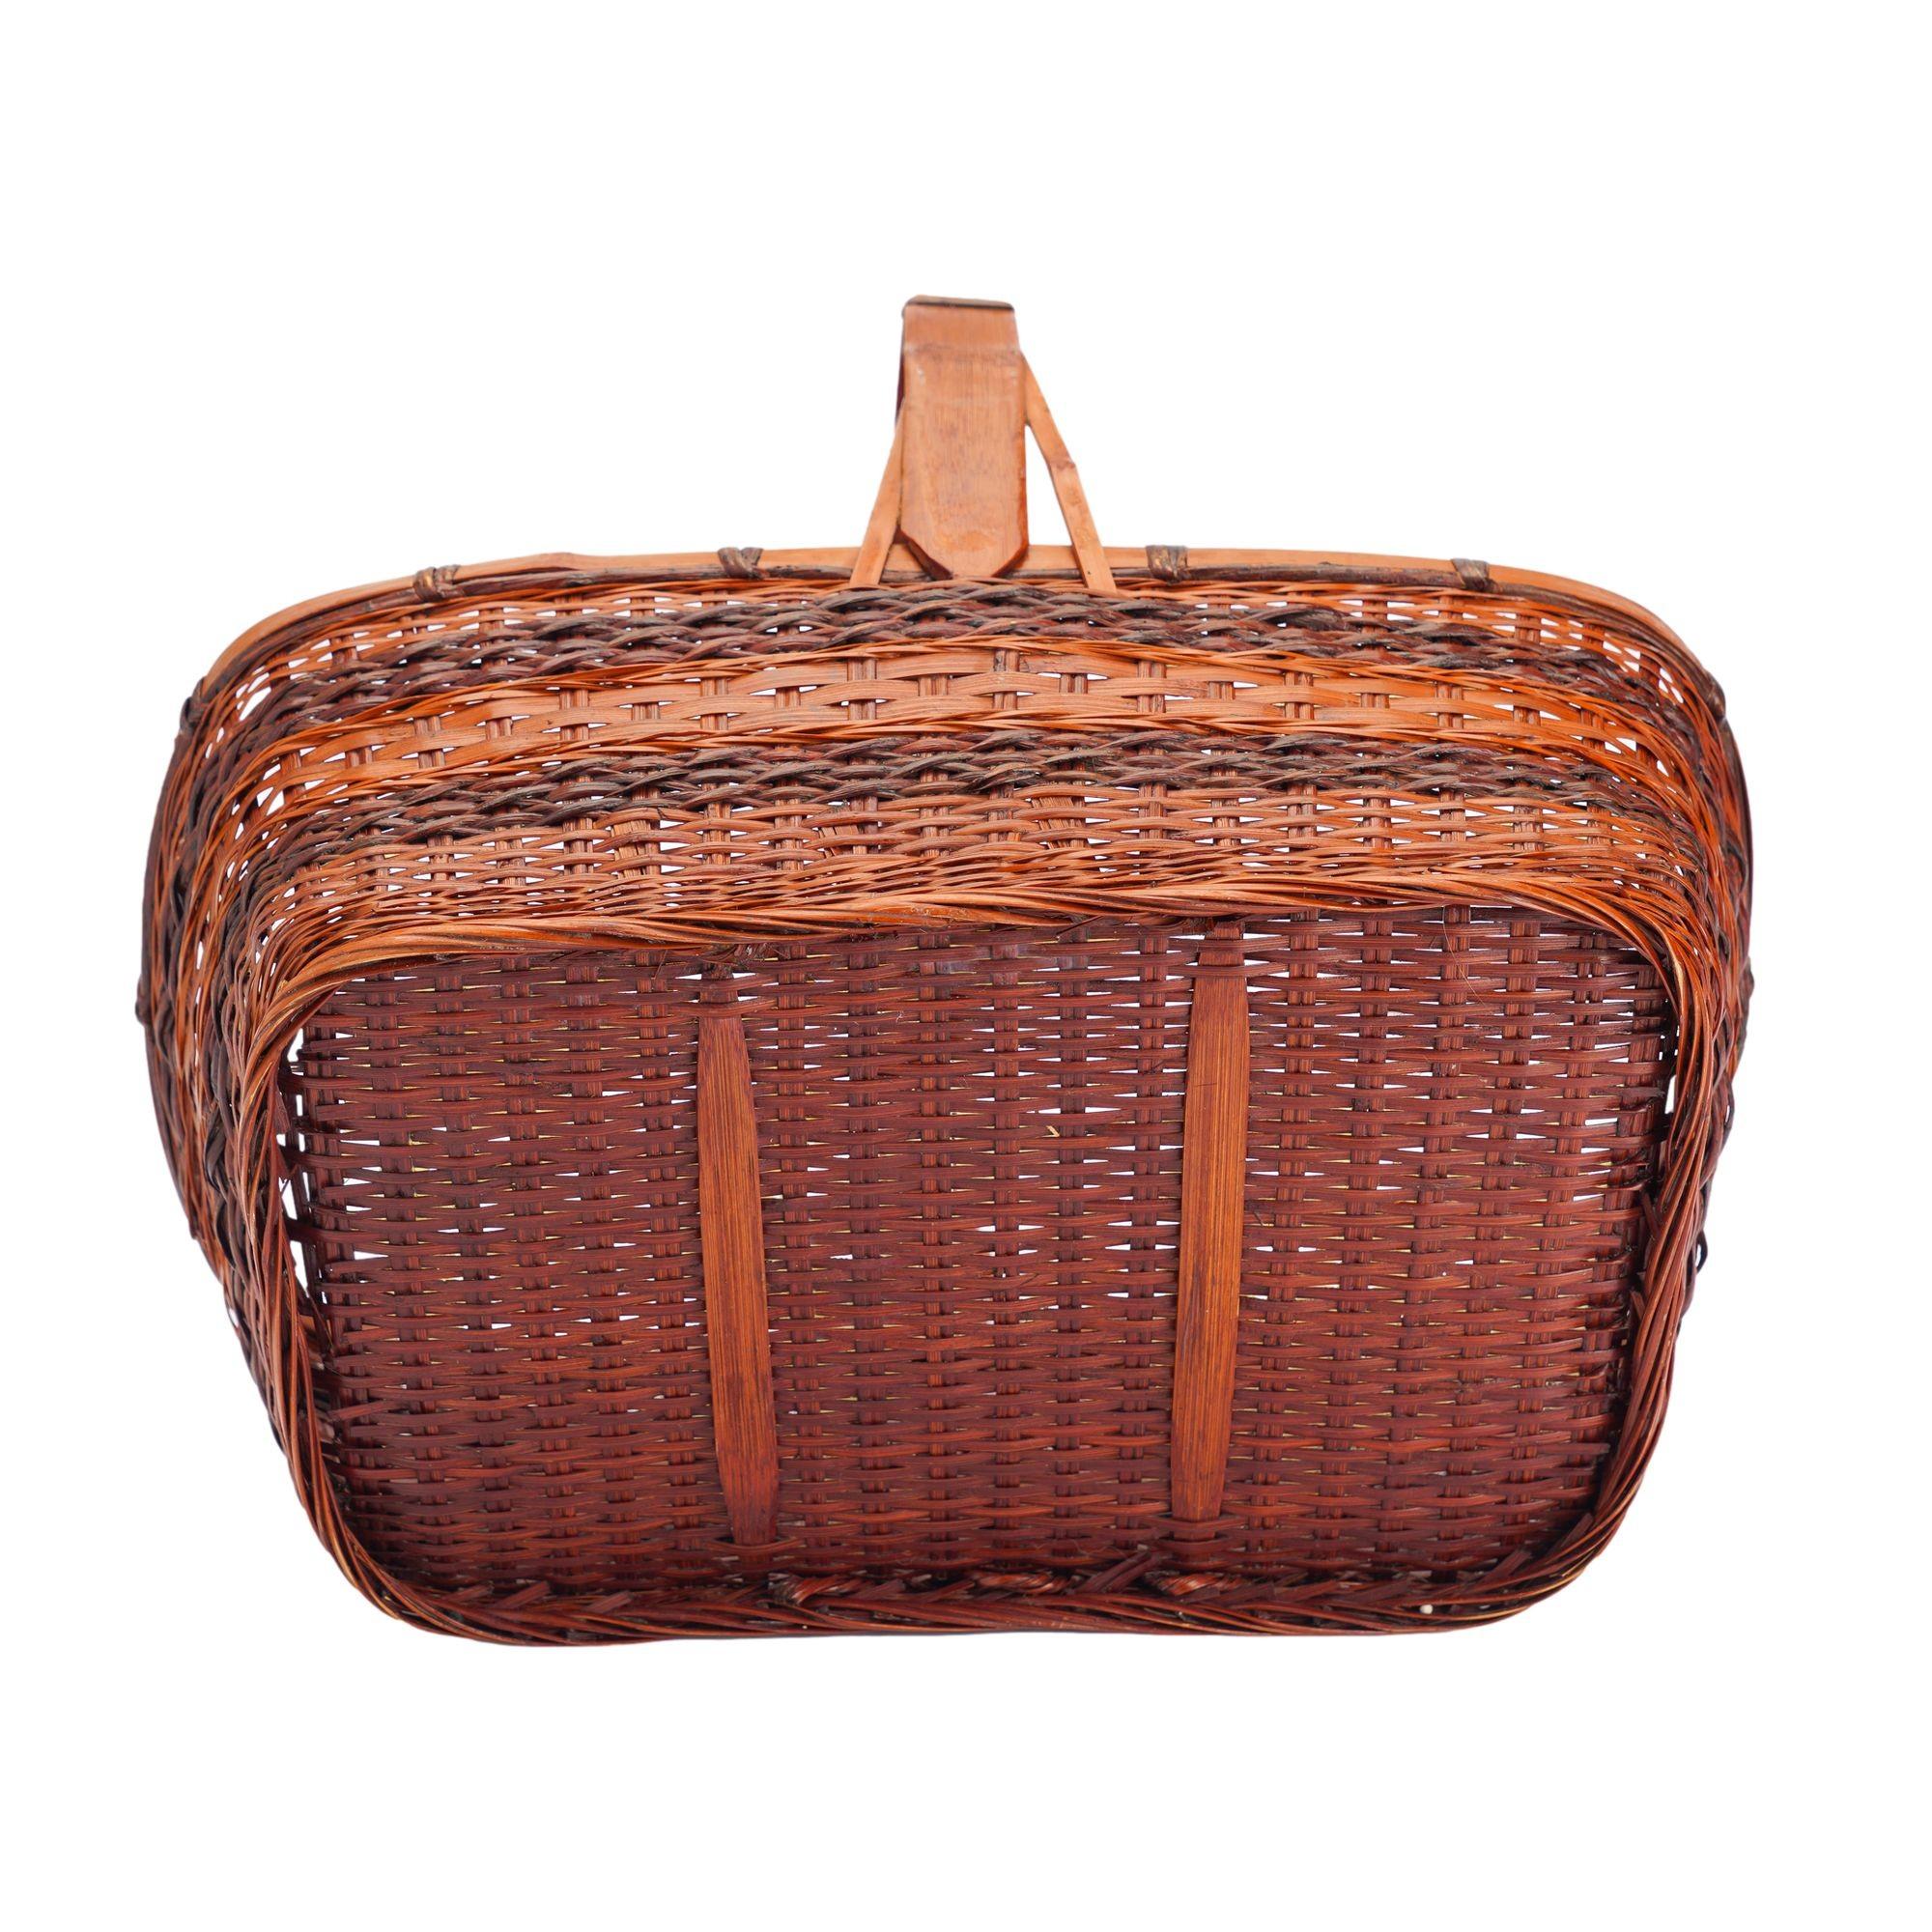 Intricately woven Japanese art basket, 1900-50 For Sale 6